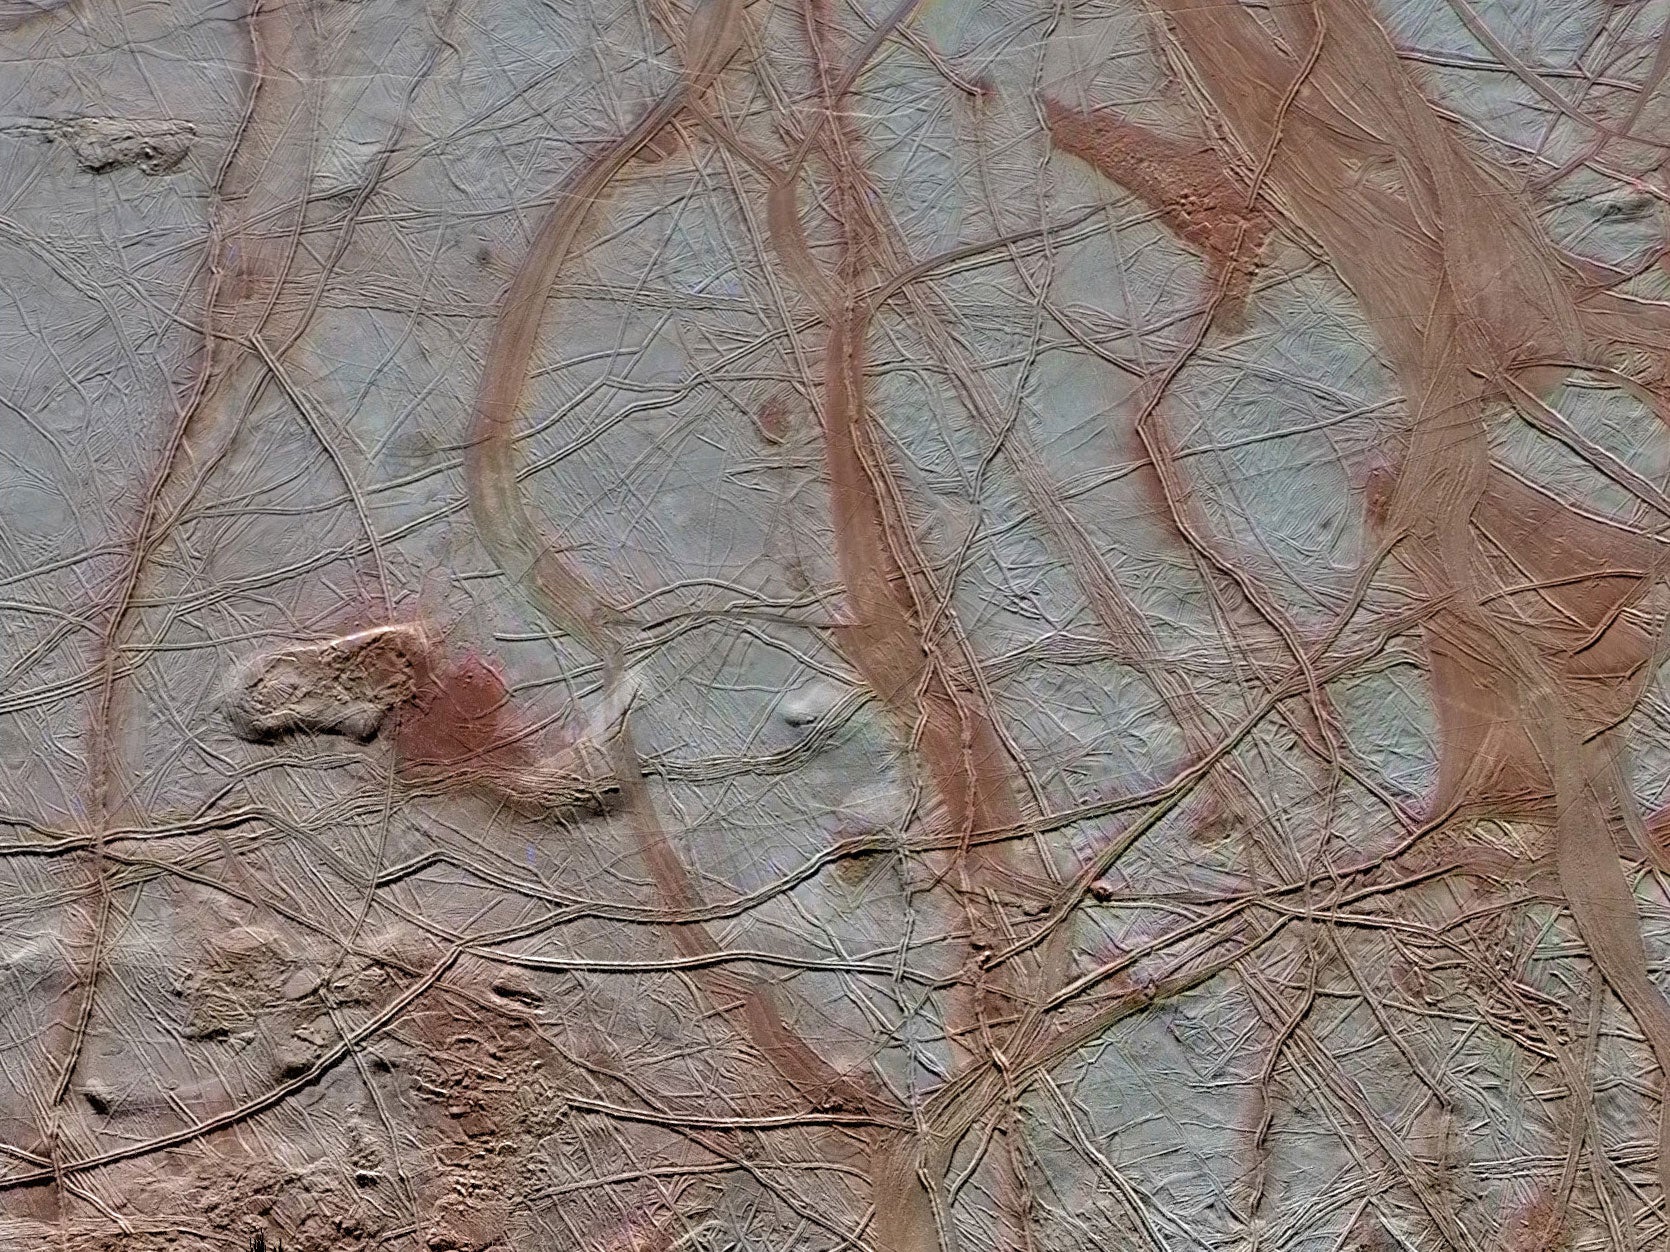 Europa's streaked surface could tell us more about the composition of its ocean